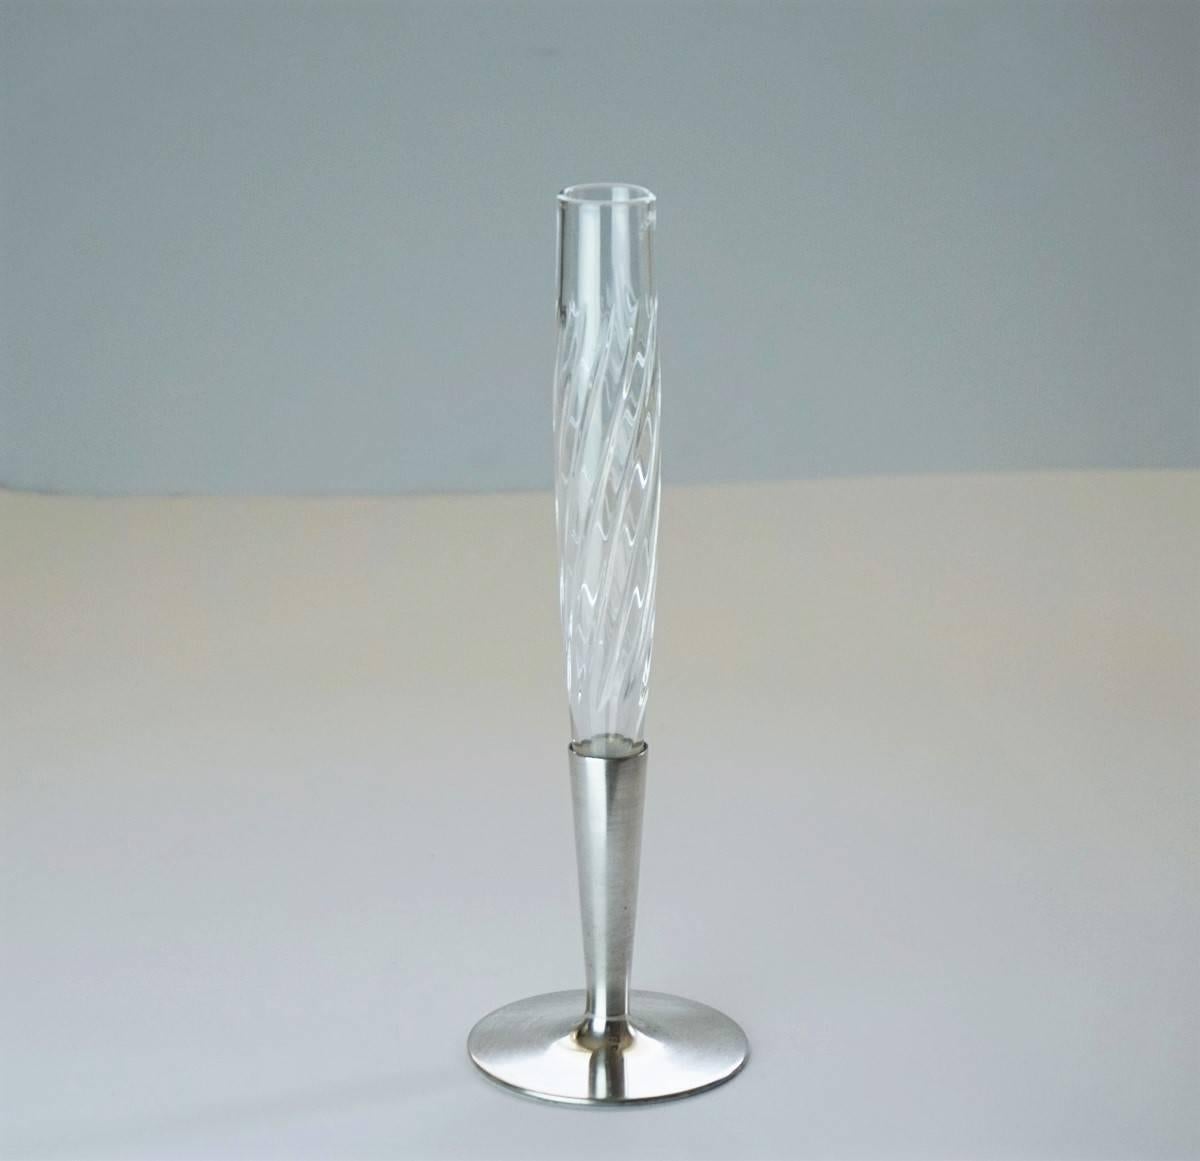 A Lovely Art Deco silver solitary of beautifully handcut crystal and sterling silver by Topázio, Portugal, circa 1930-1935.
Hallmarked: Topázio poincon.
Measures: Height 8.75 in (22 cm)
Diameter/base 2.50 in (7 cm).
 
 